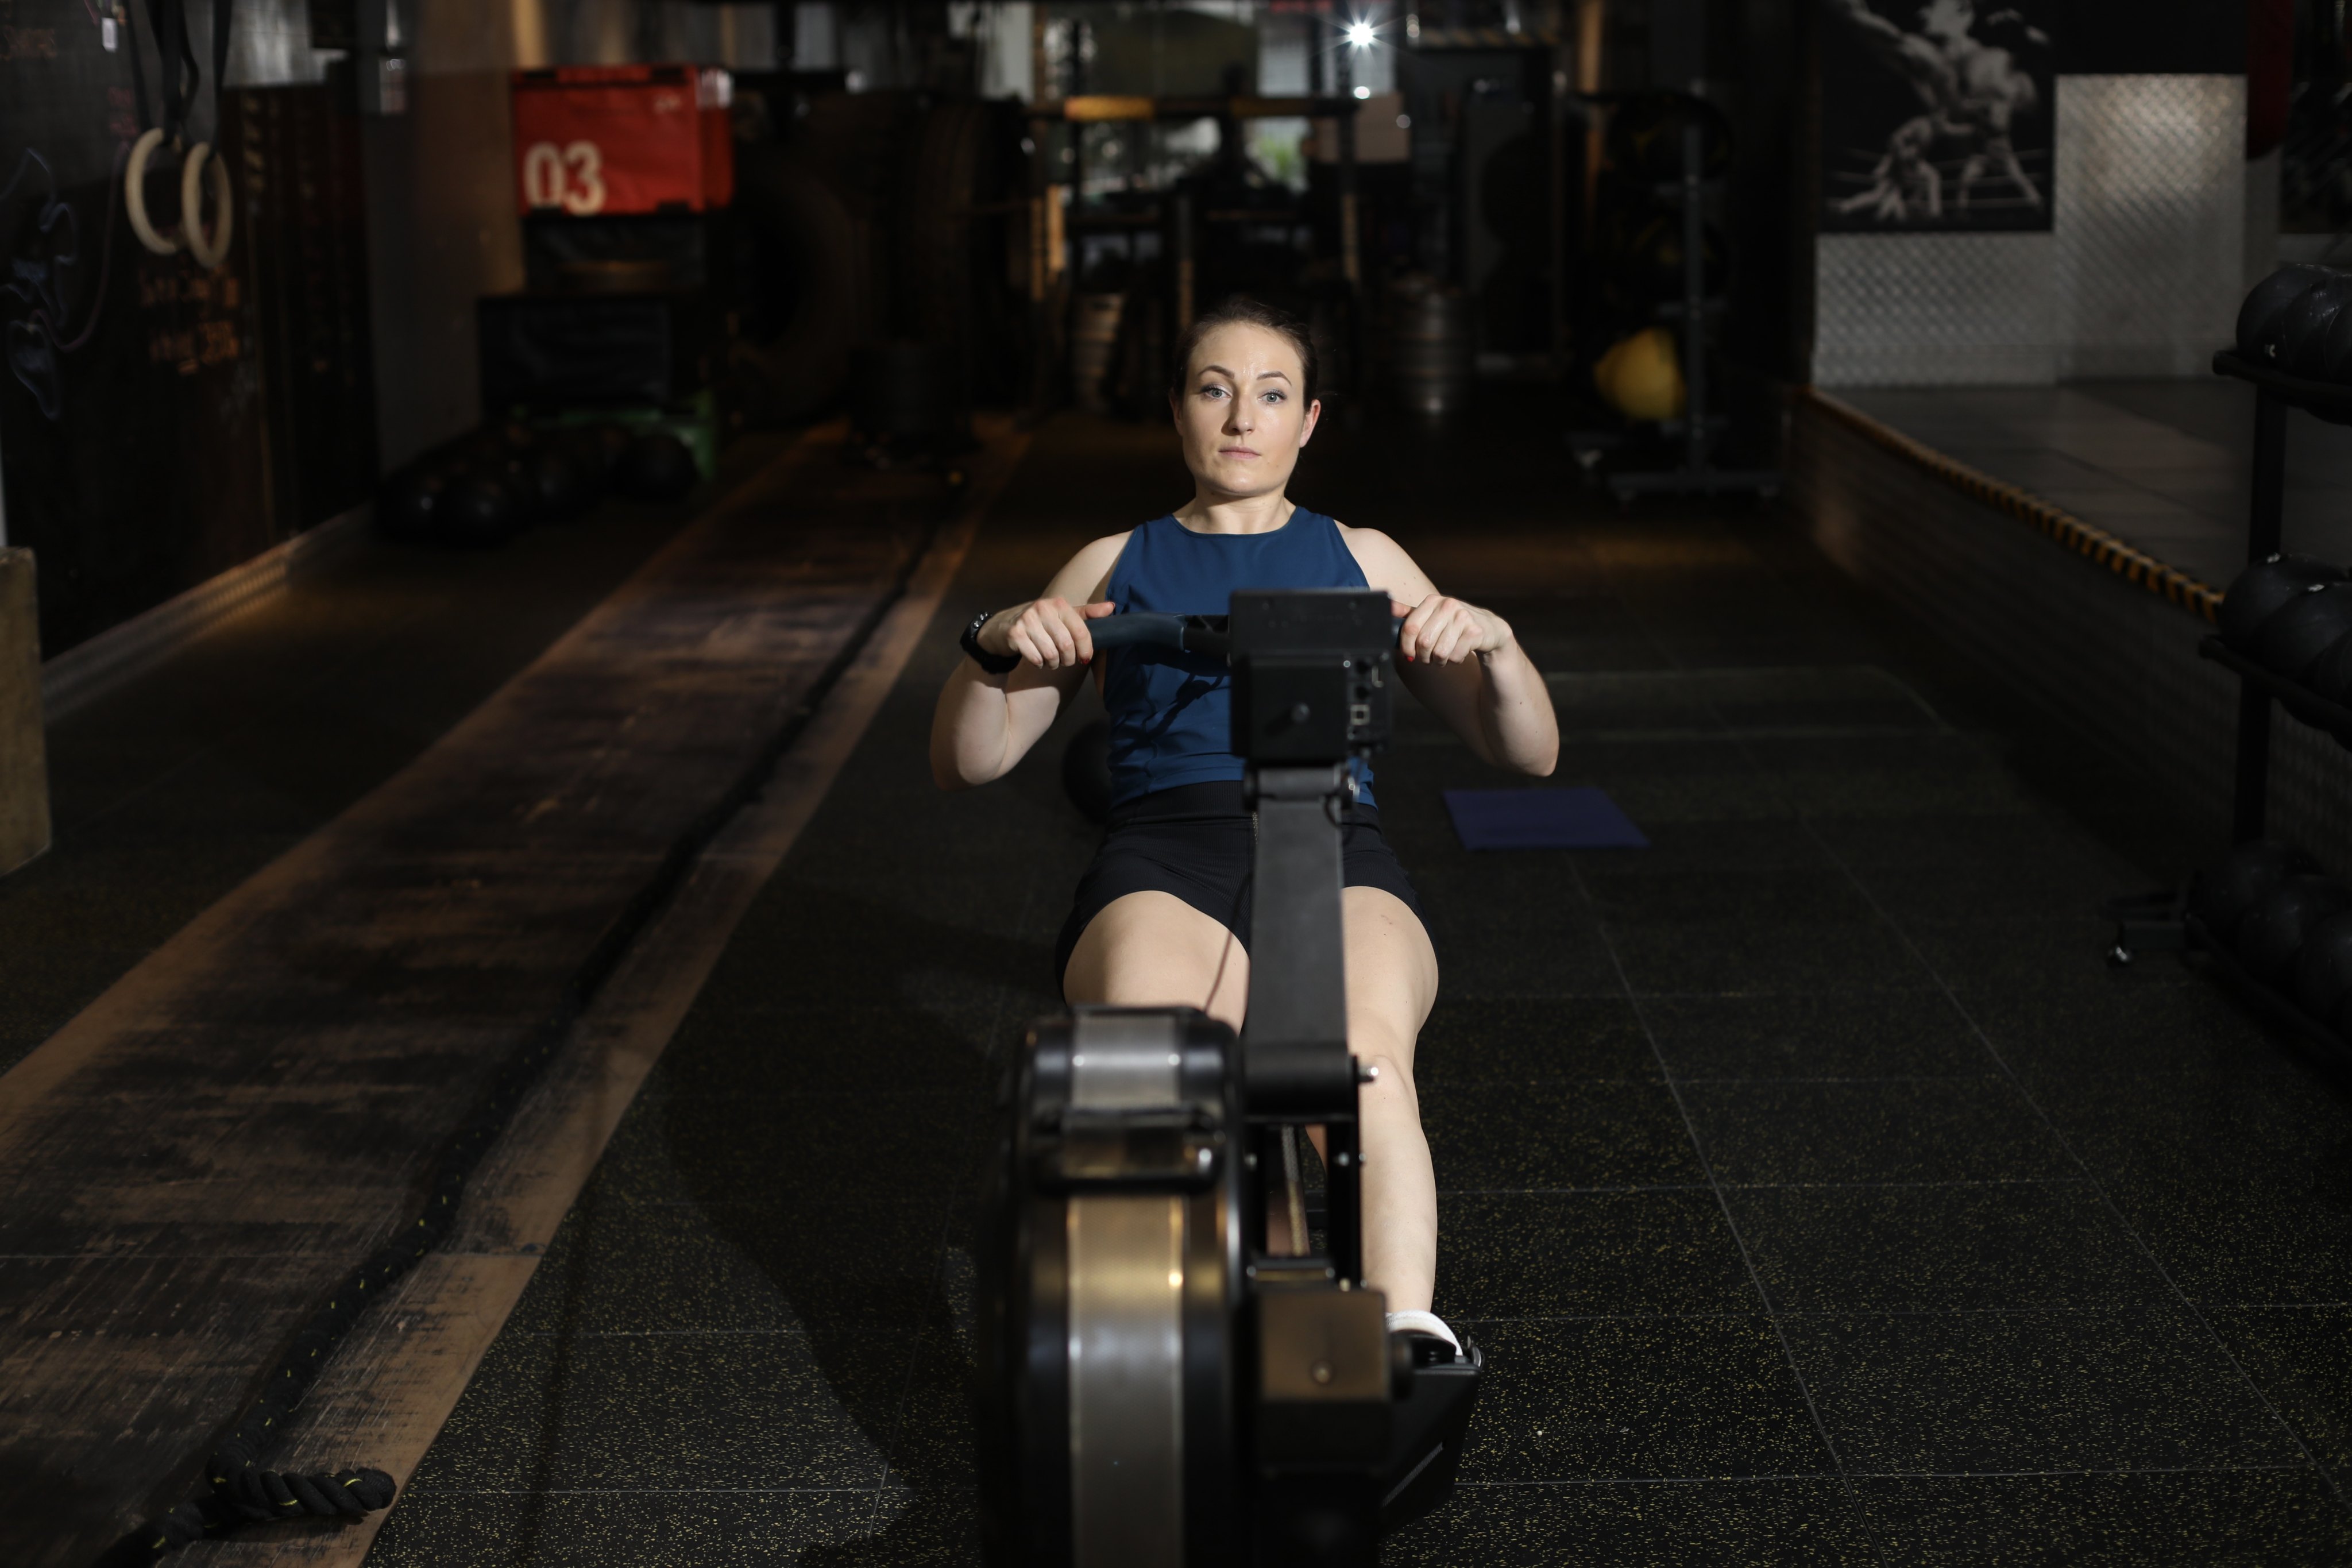 Hong Kong fitness trainer Ali Dowding (above) overcame depression years ago, helped by family and therapy. She is rowing 750km to raise awareness of men’s mental health and promote the Samaritans. Photo: Xiaomei Chen